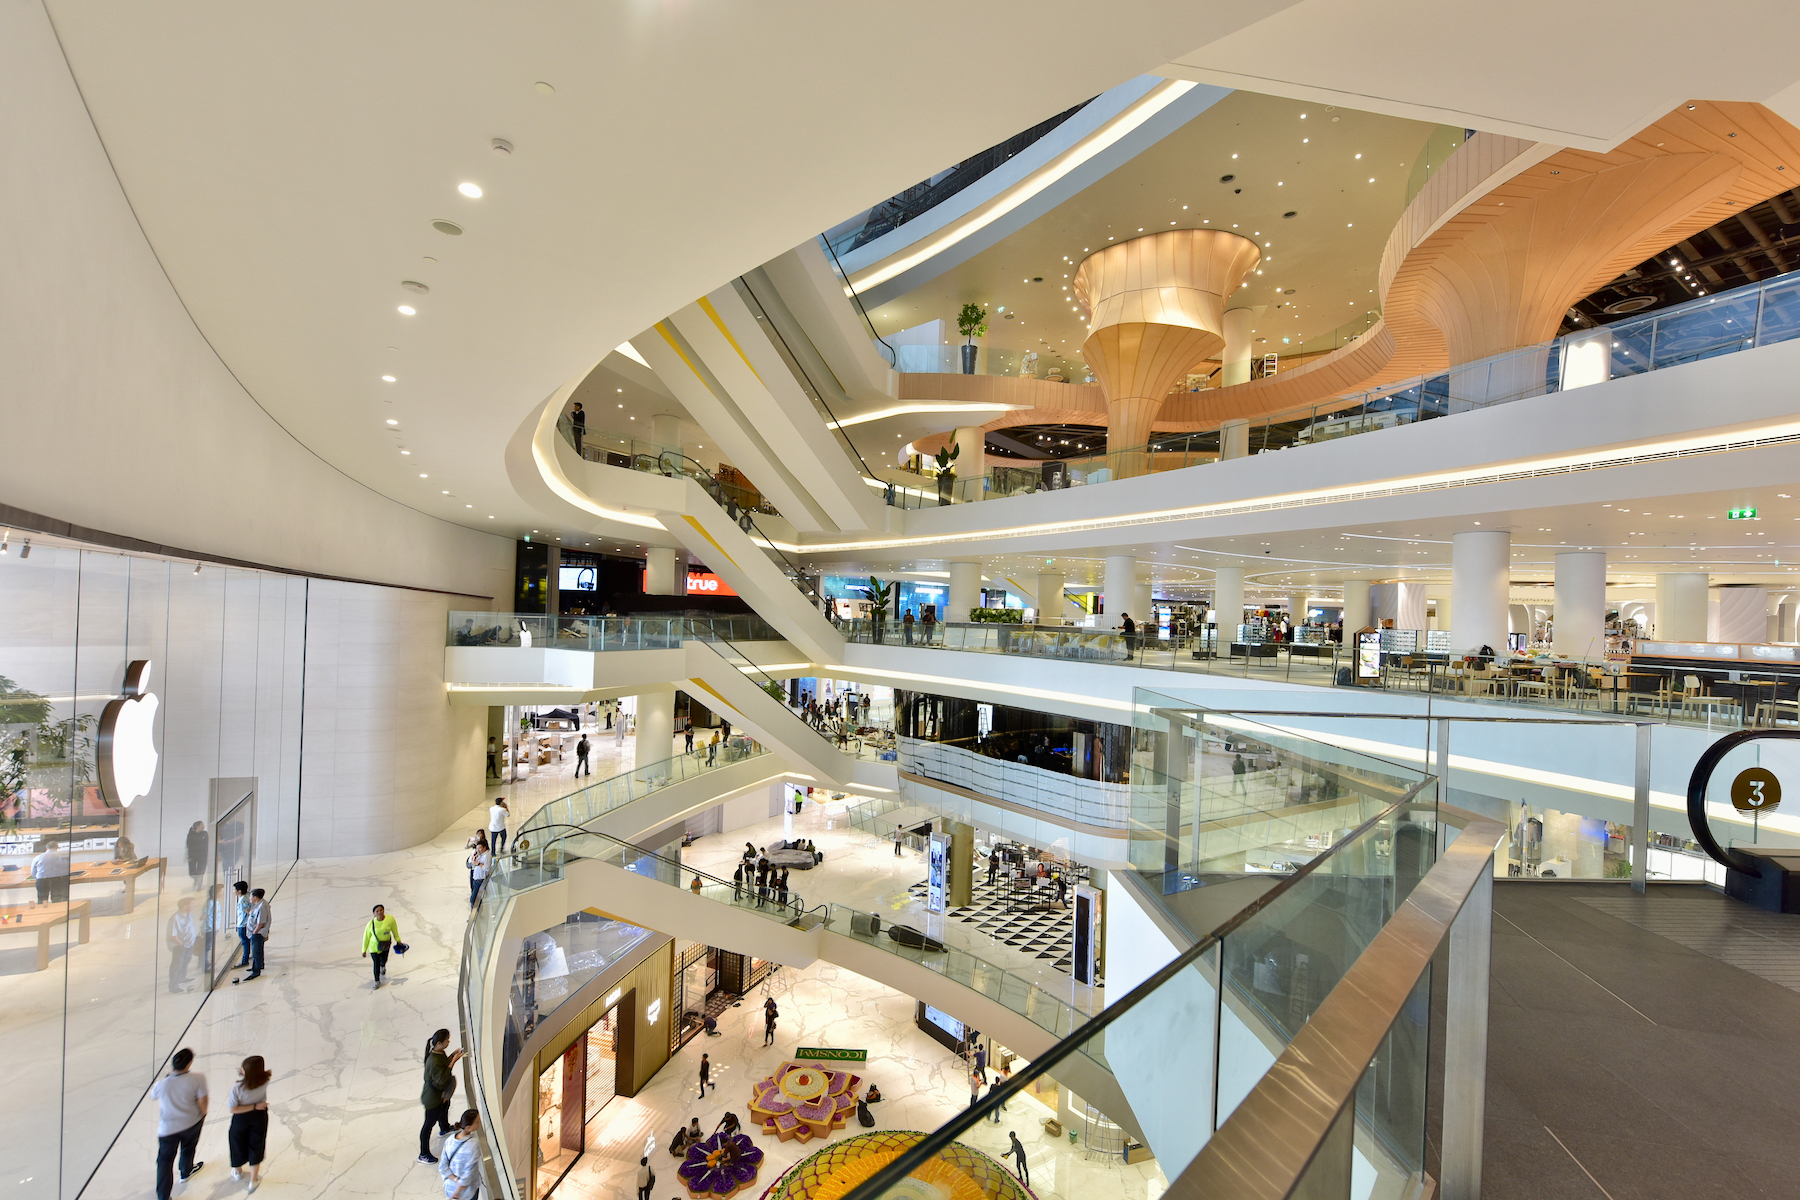 A Corner of a Luxury Brand Shop in ICONSIAM Editorial Image - Image of  iconsiam, home: 271822645